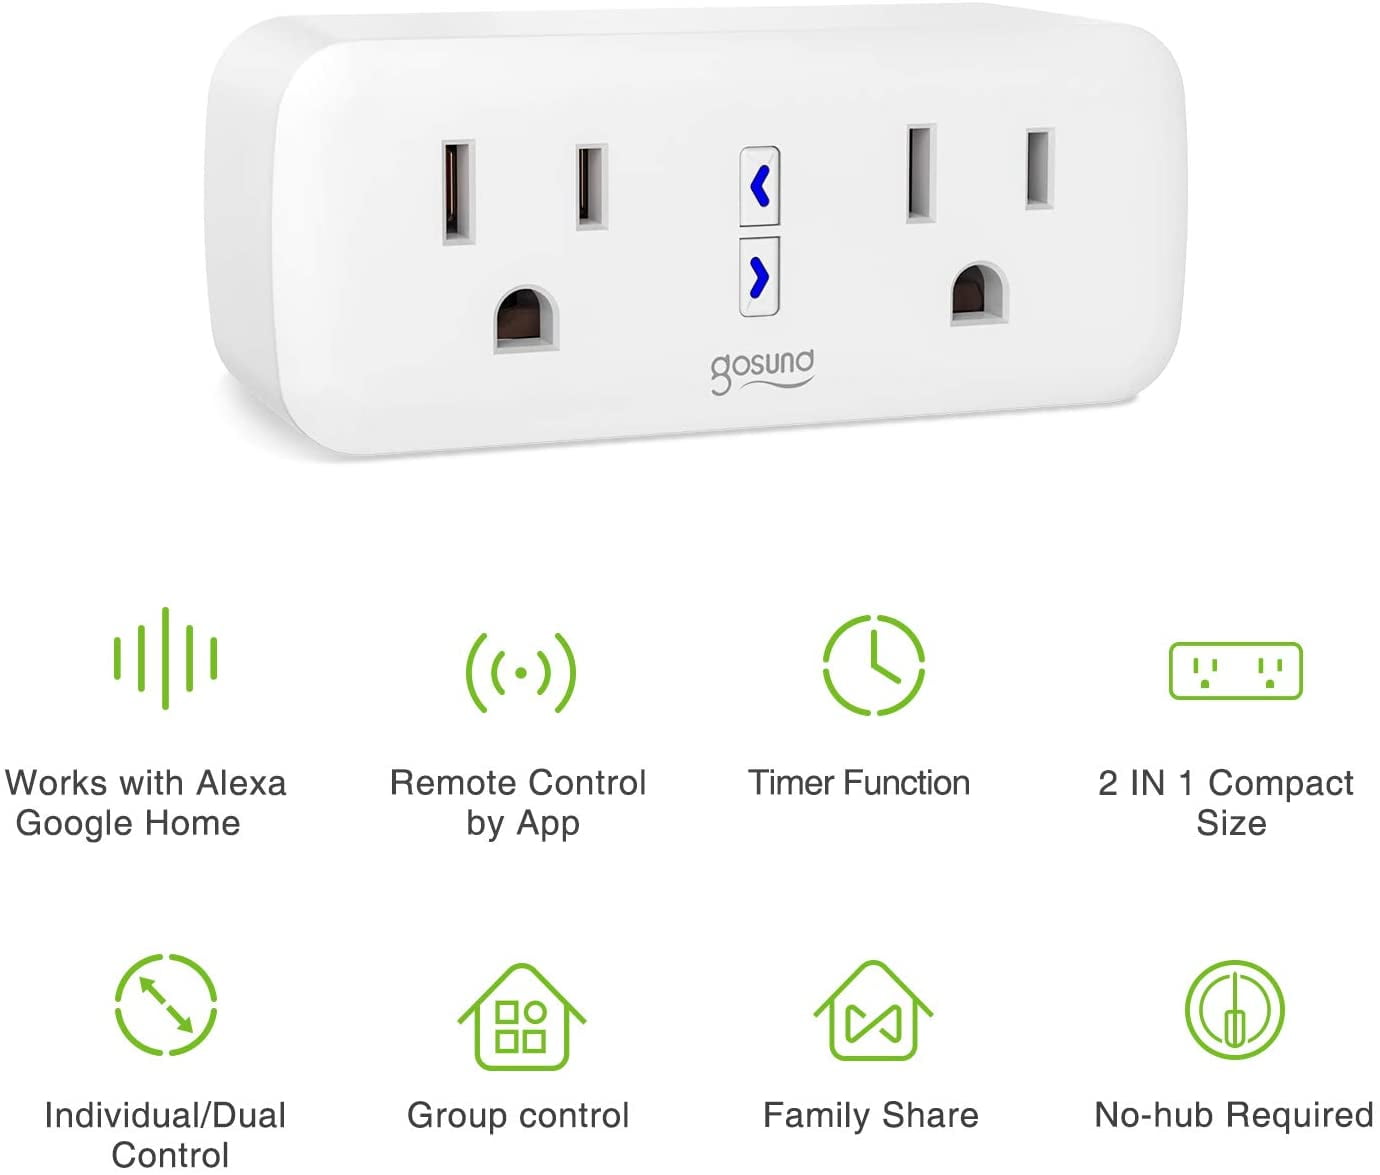 Google Home: How To Group Smart Plugs Together